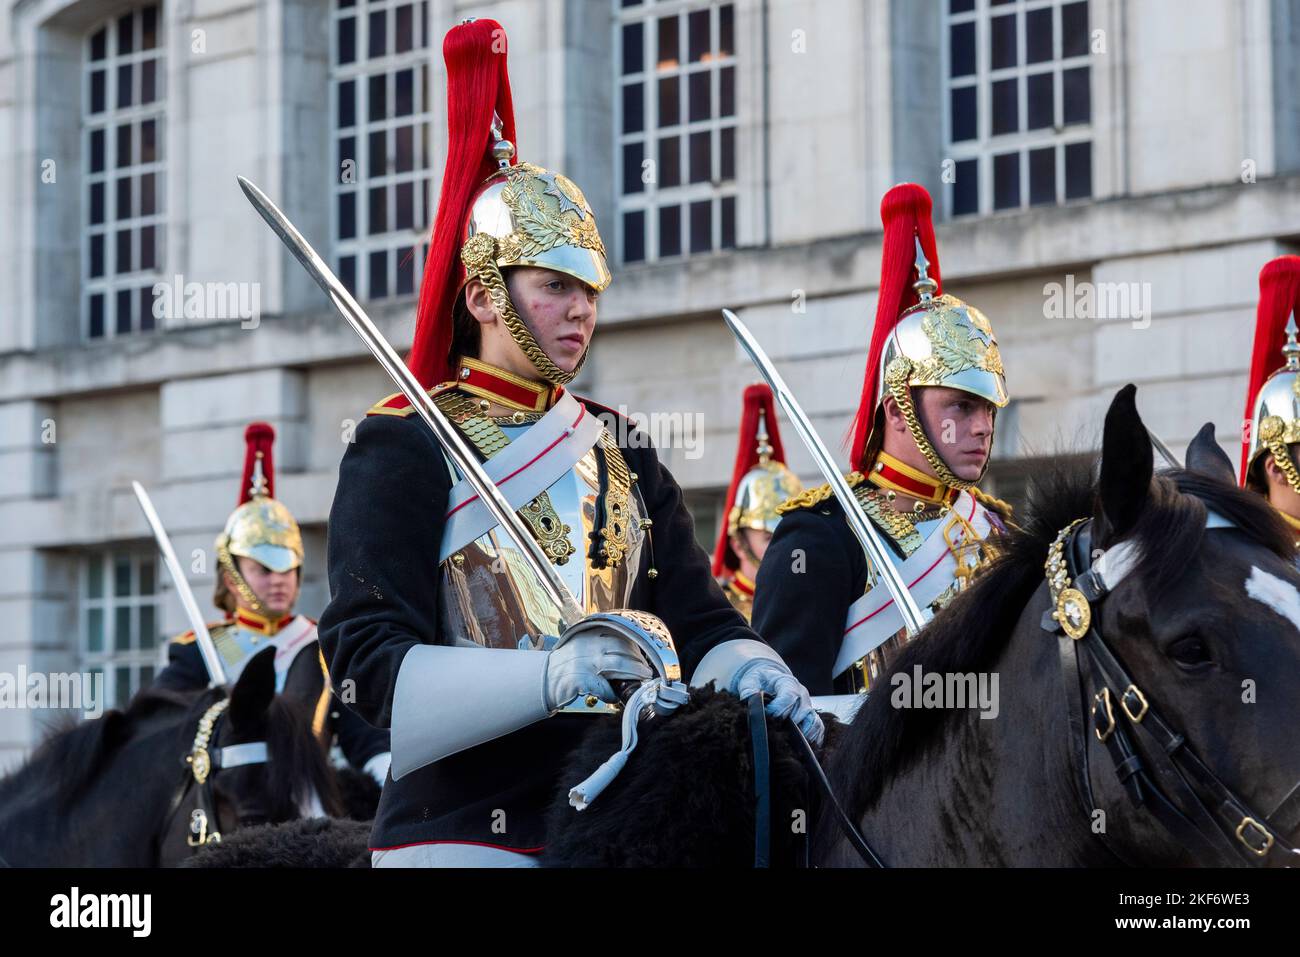 The Blues and Royals of the The Household Cavalry at the Lord Mayor's Show parade in the City of London, UK. Female soldier riding on horseback Stock Photo